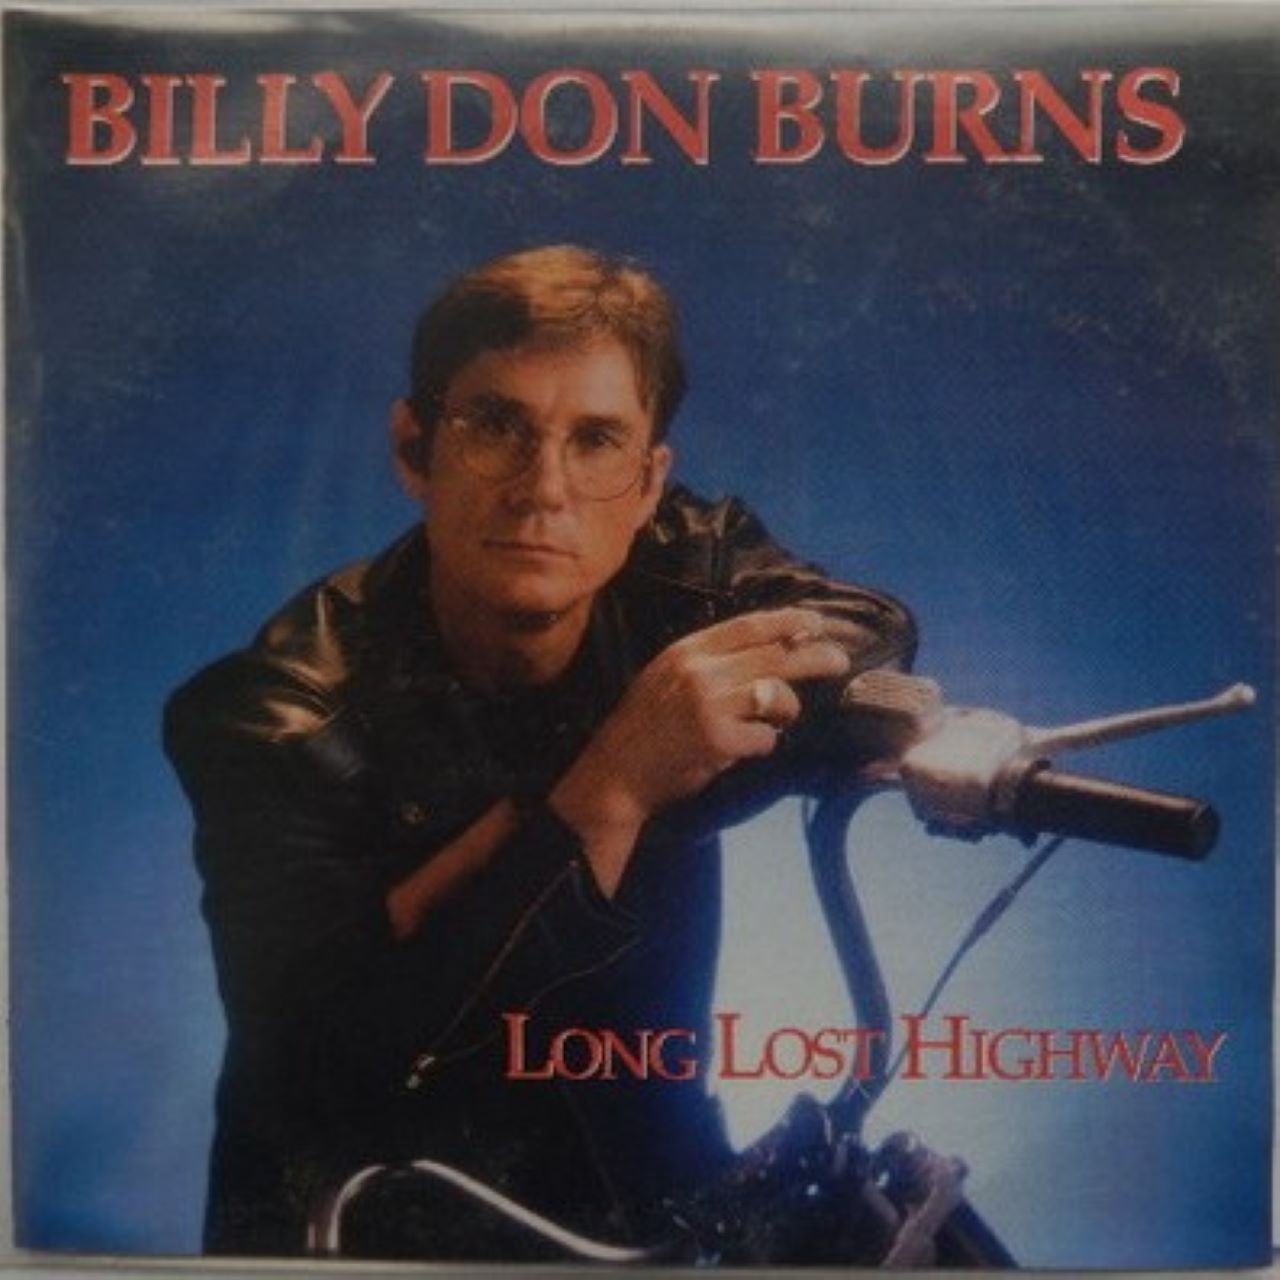 Billy Don Burns - Long Lost Highway cover album